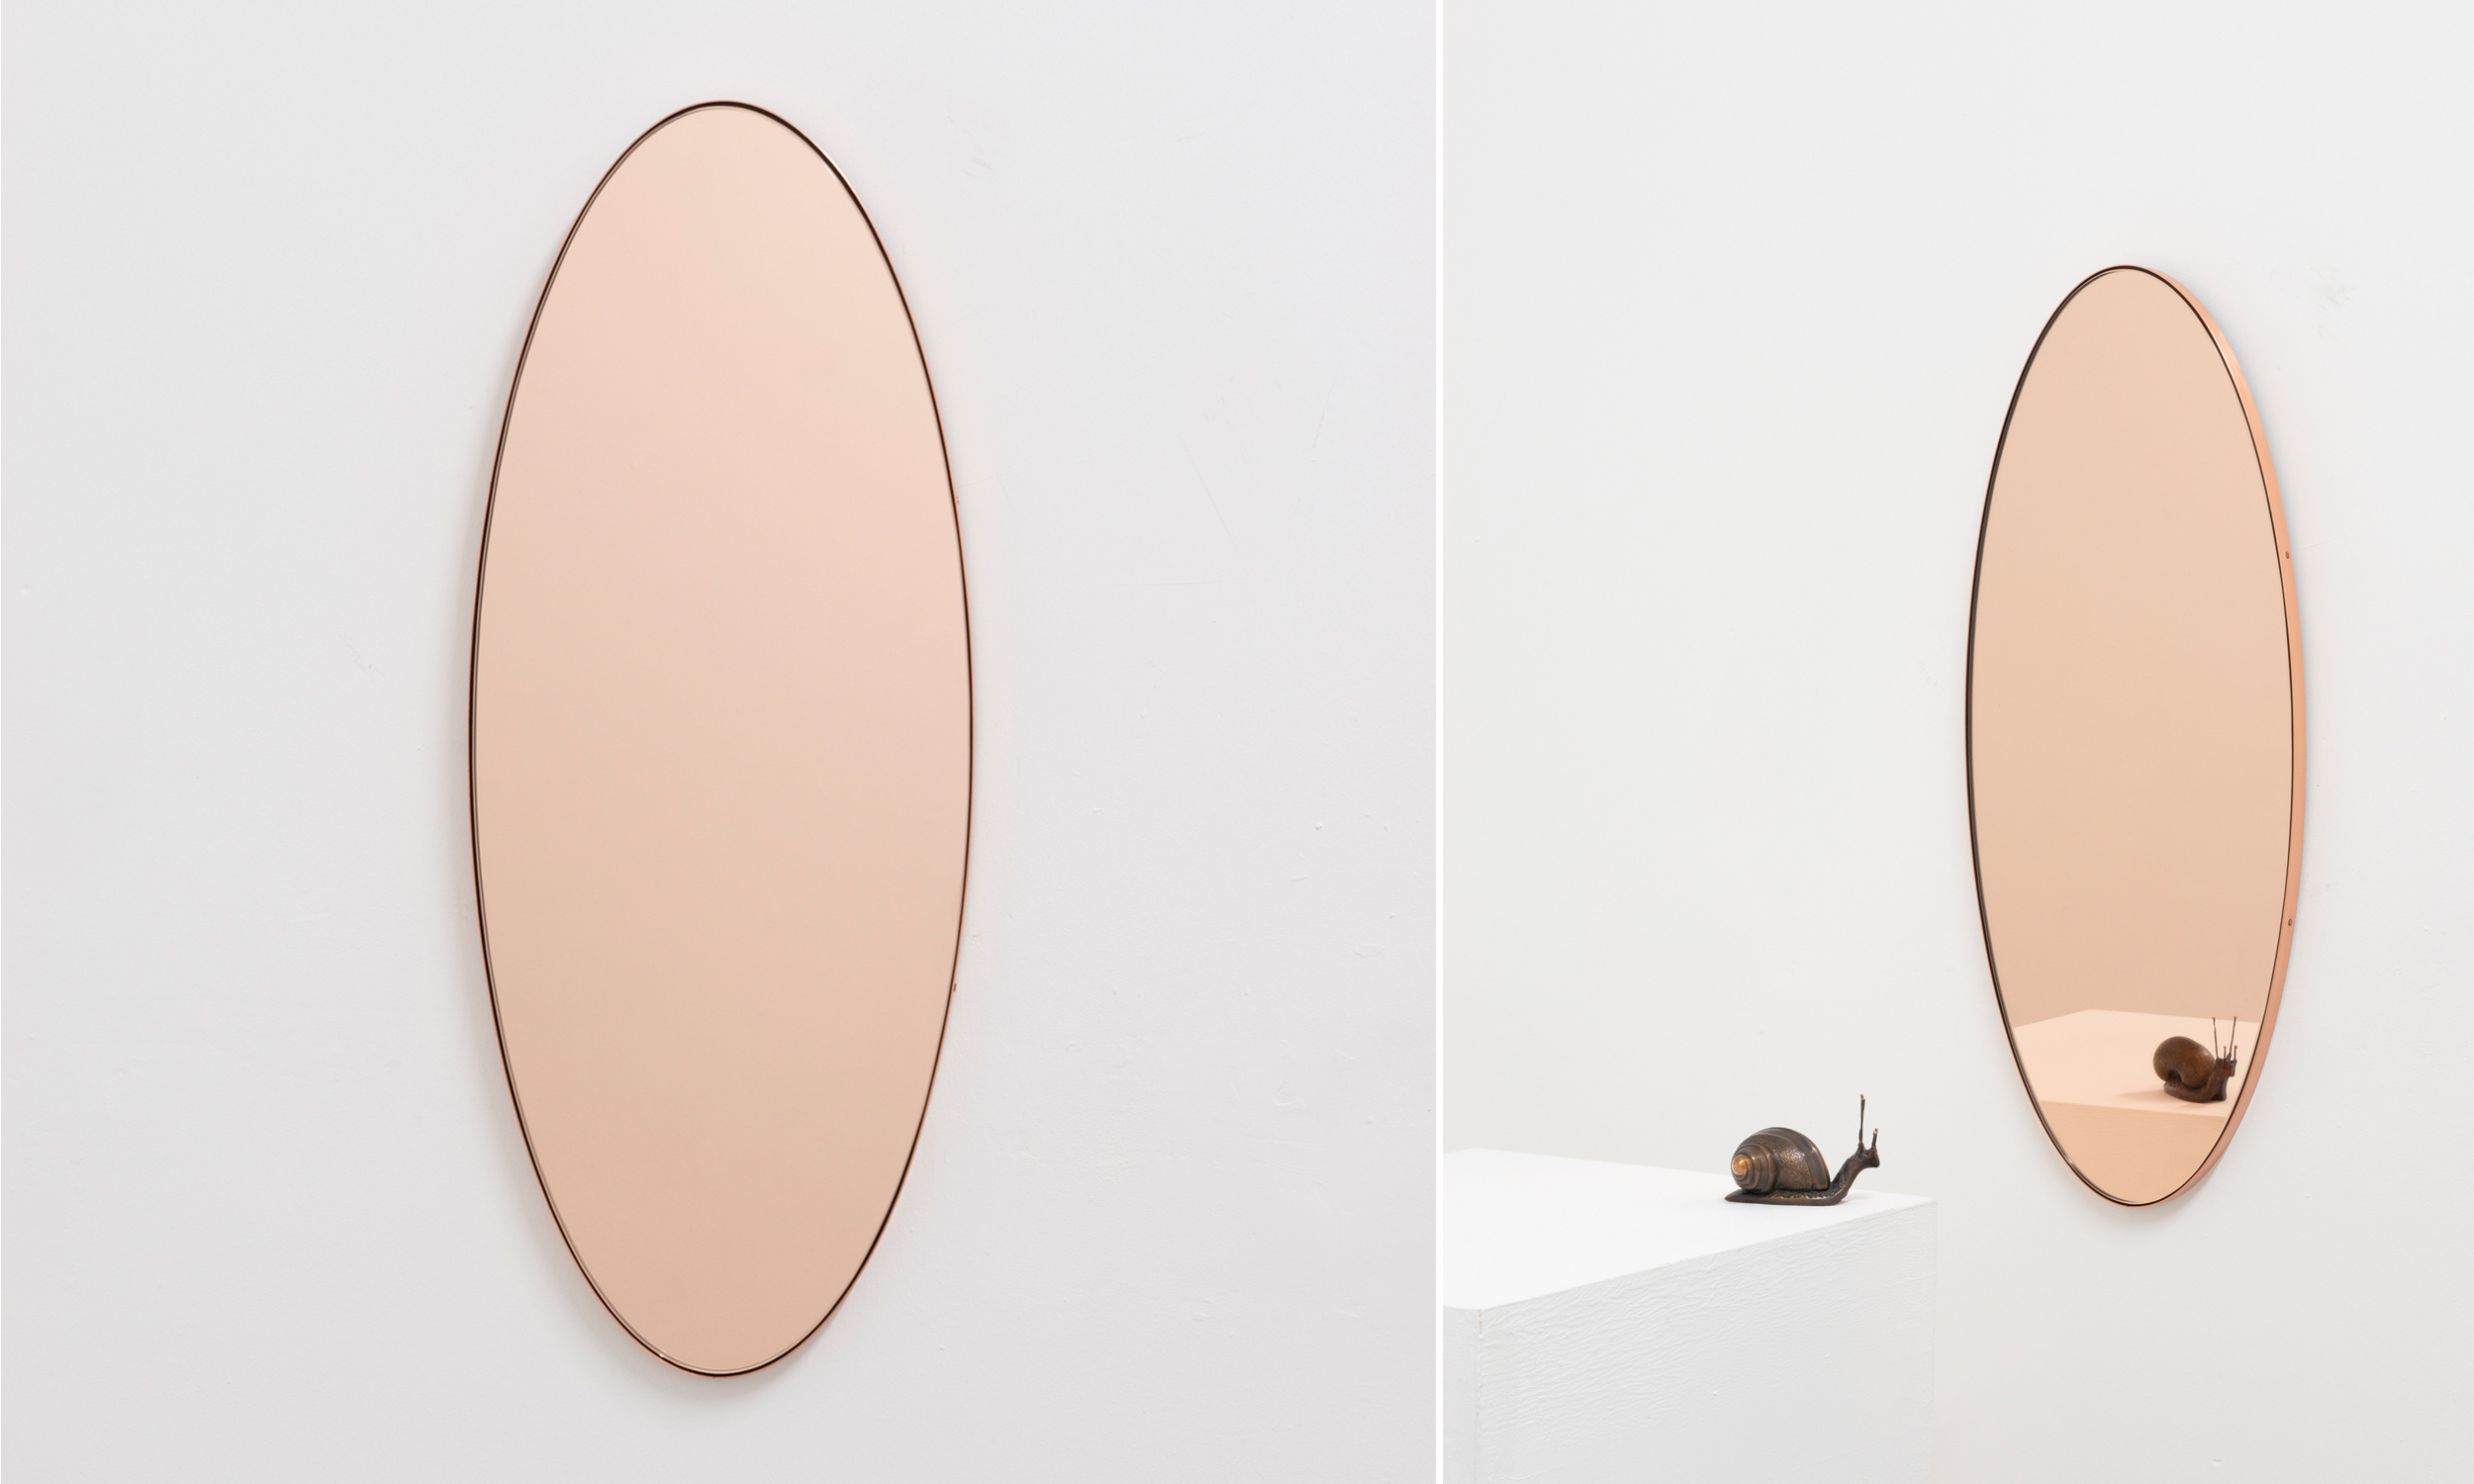 Alguacil & Perkoff Contemporary Bespoke Handcrafted Oval Mirrors